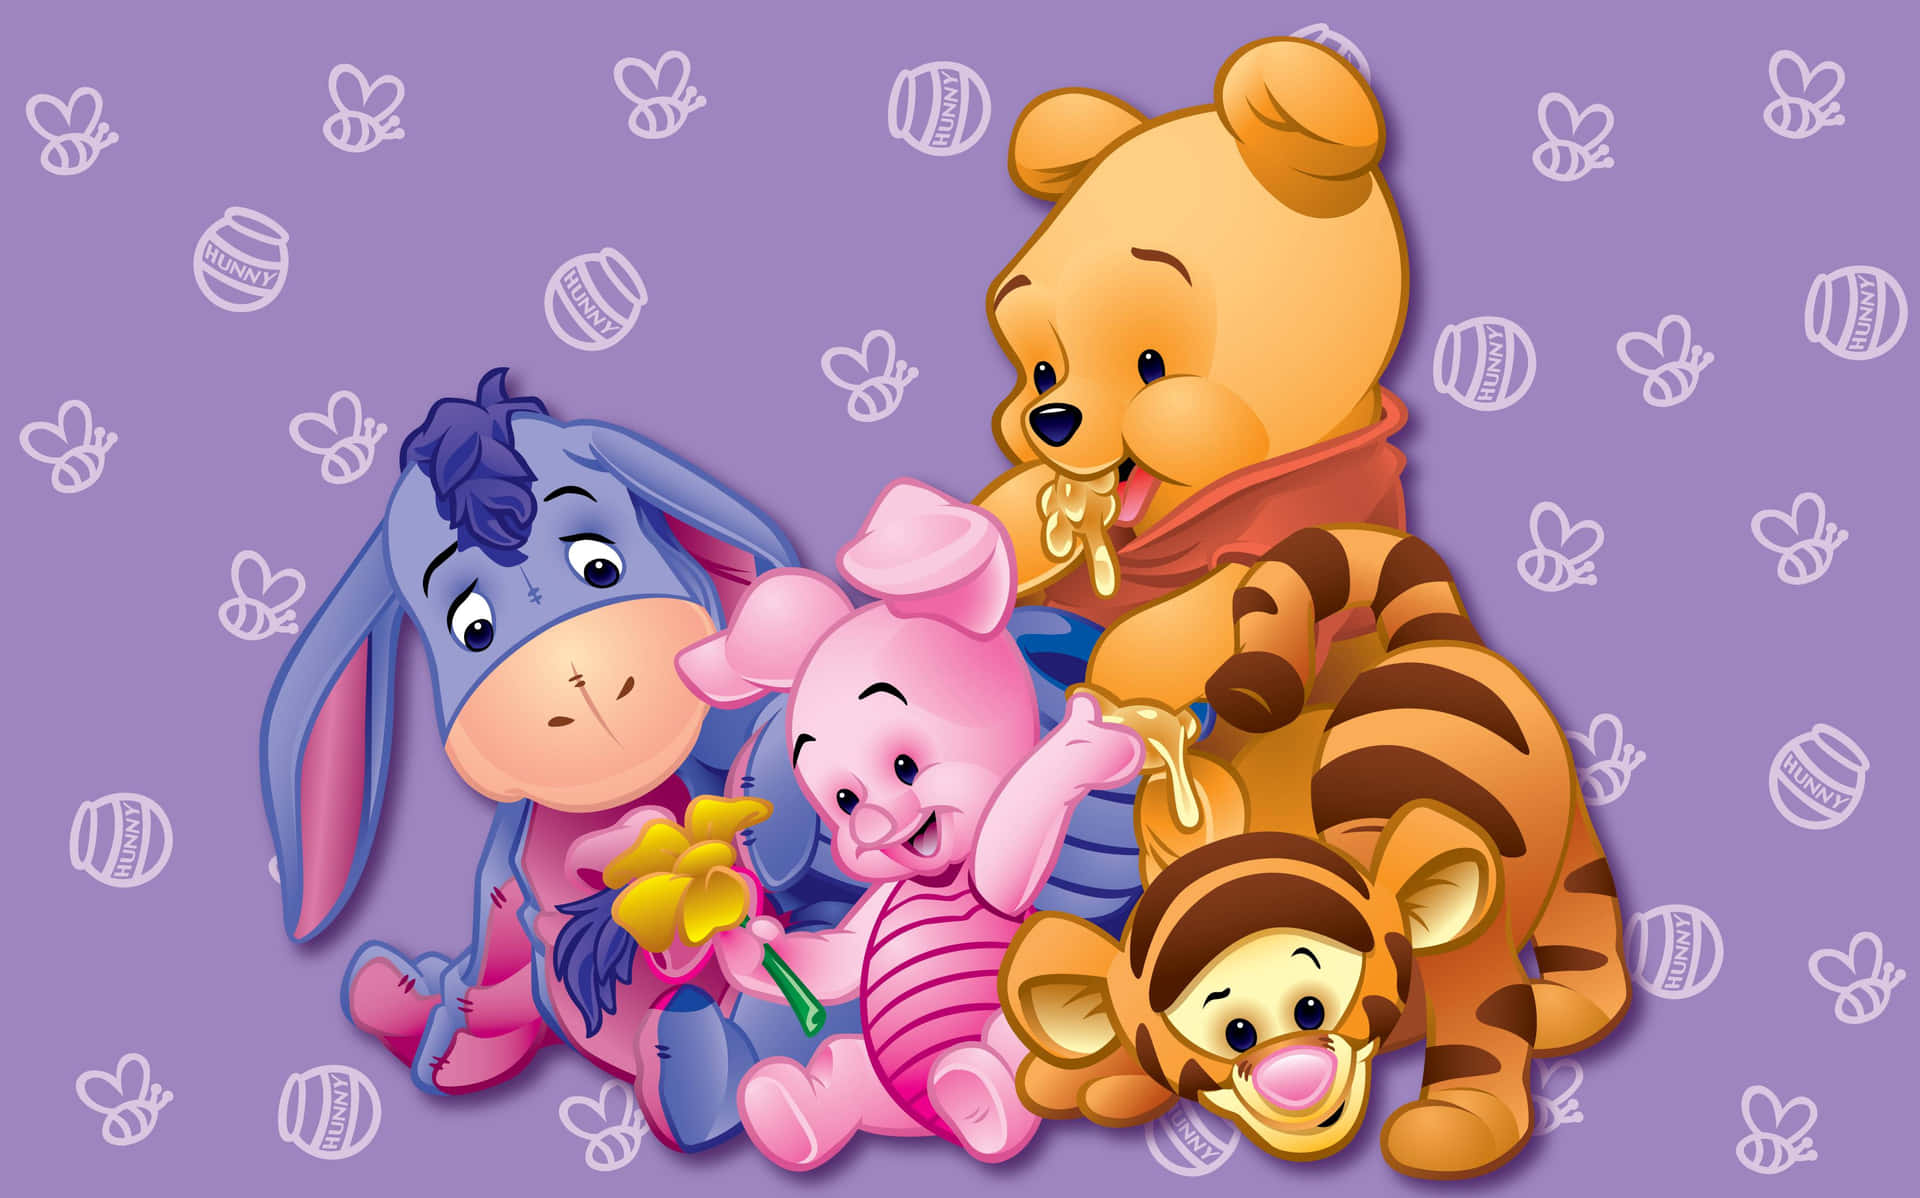 Enjoy The Classic Disney Characters Of Winnie The Pooh, Eeyore And Tigger Having Some Fun In The Hundred Acre Wood! Background